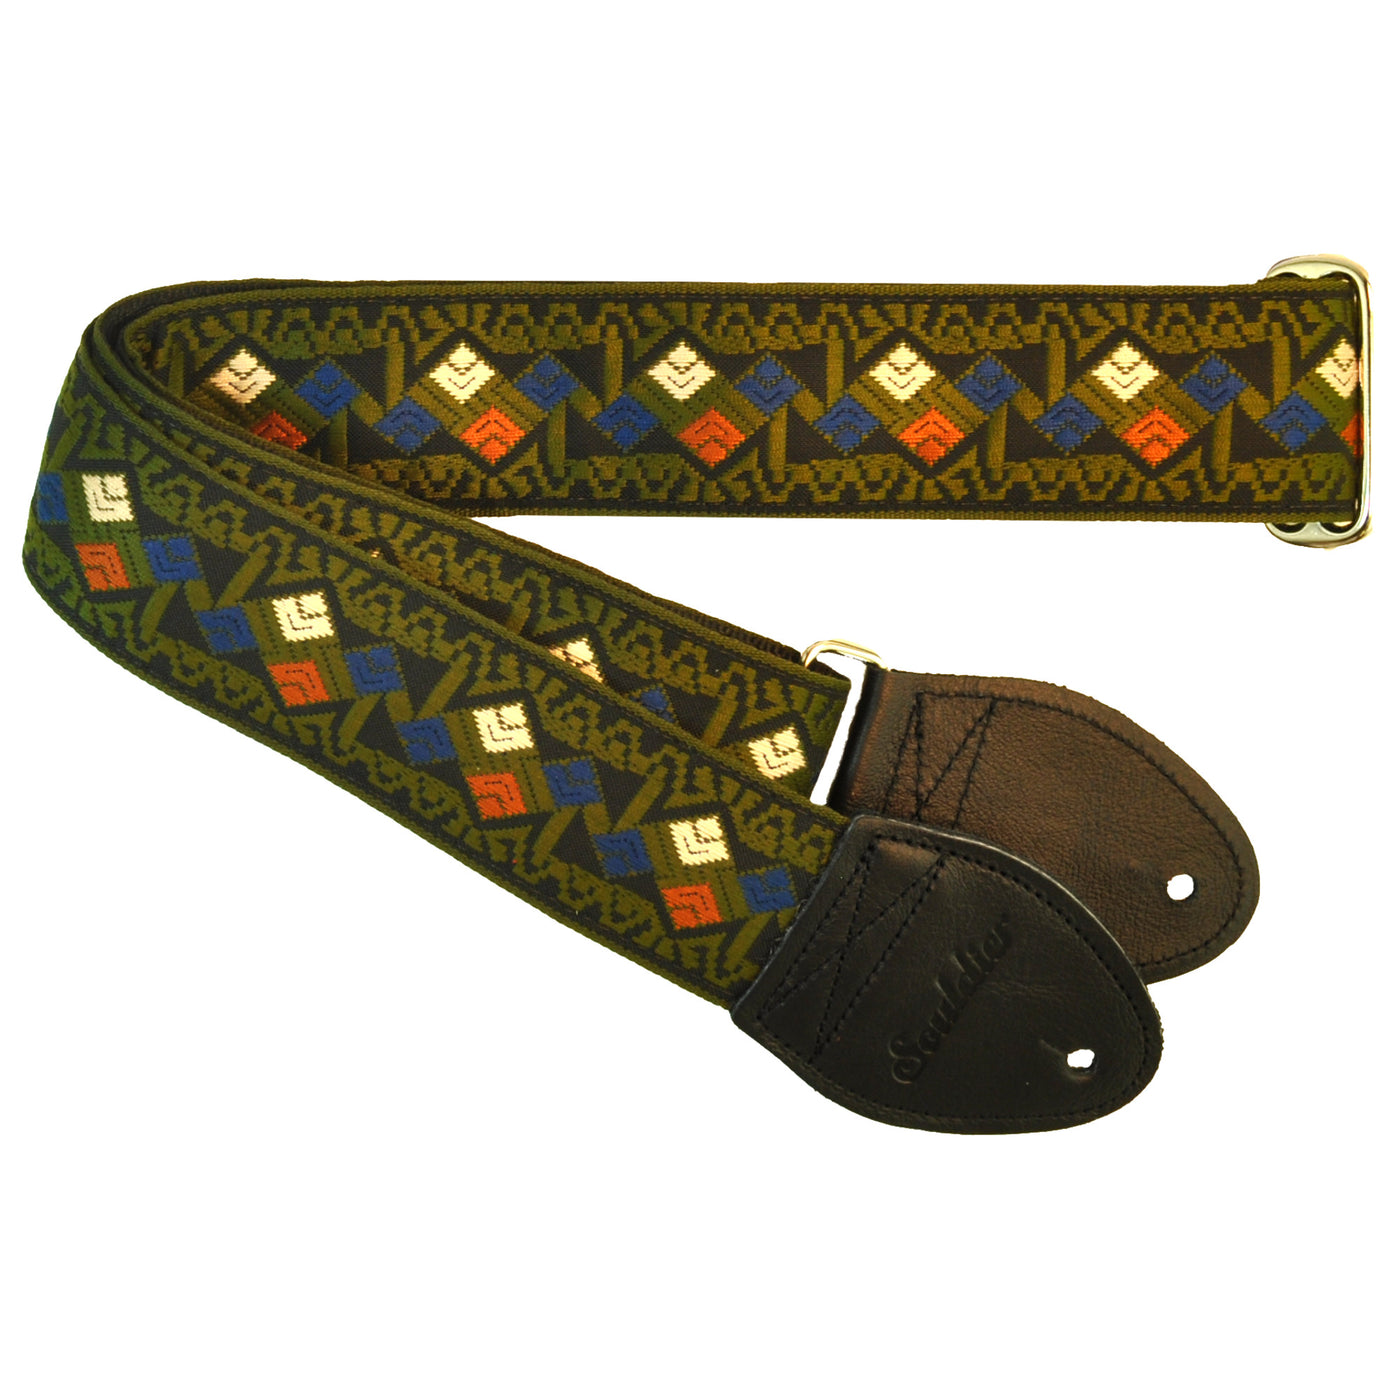 Souldier GS1435BK02BK - Handmade Seatbelt Guitar Strap for Bass, Electric or Acoustic Guitar, 2 Inches Wide and Adjustable Length from 30" to 63"  Made in the USA, Clapton, Olive